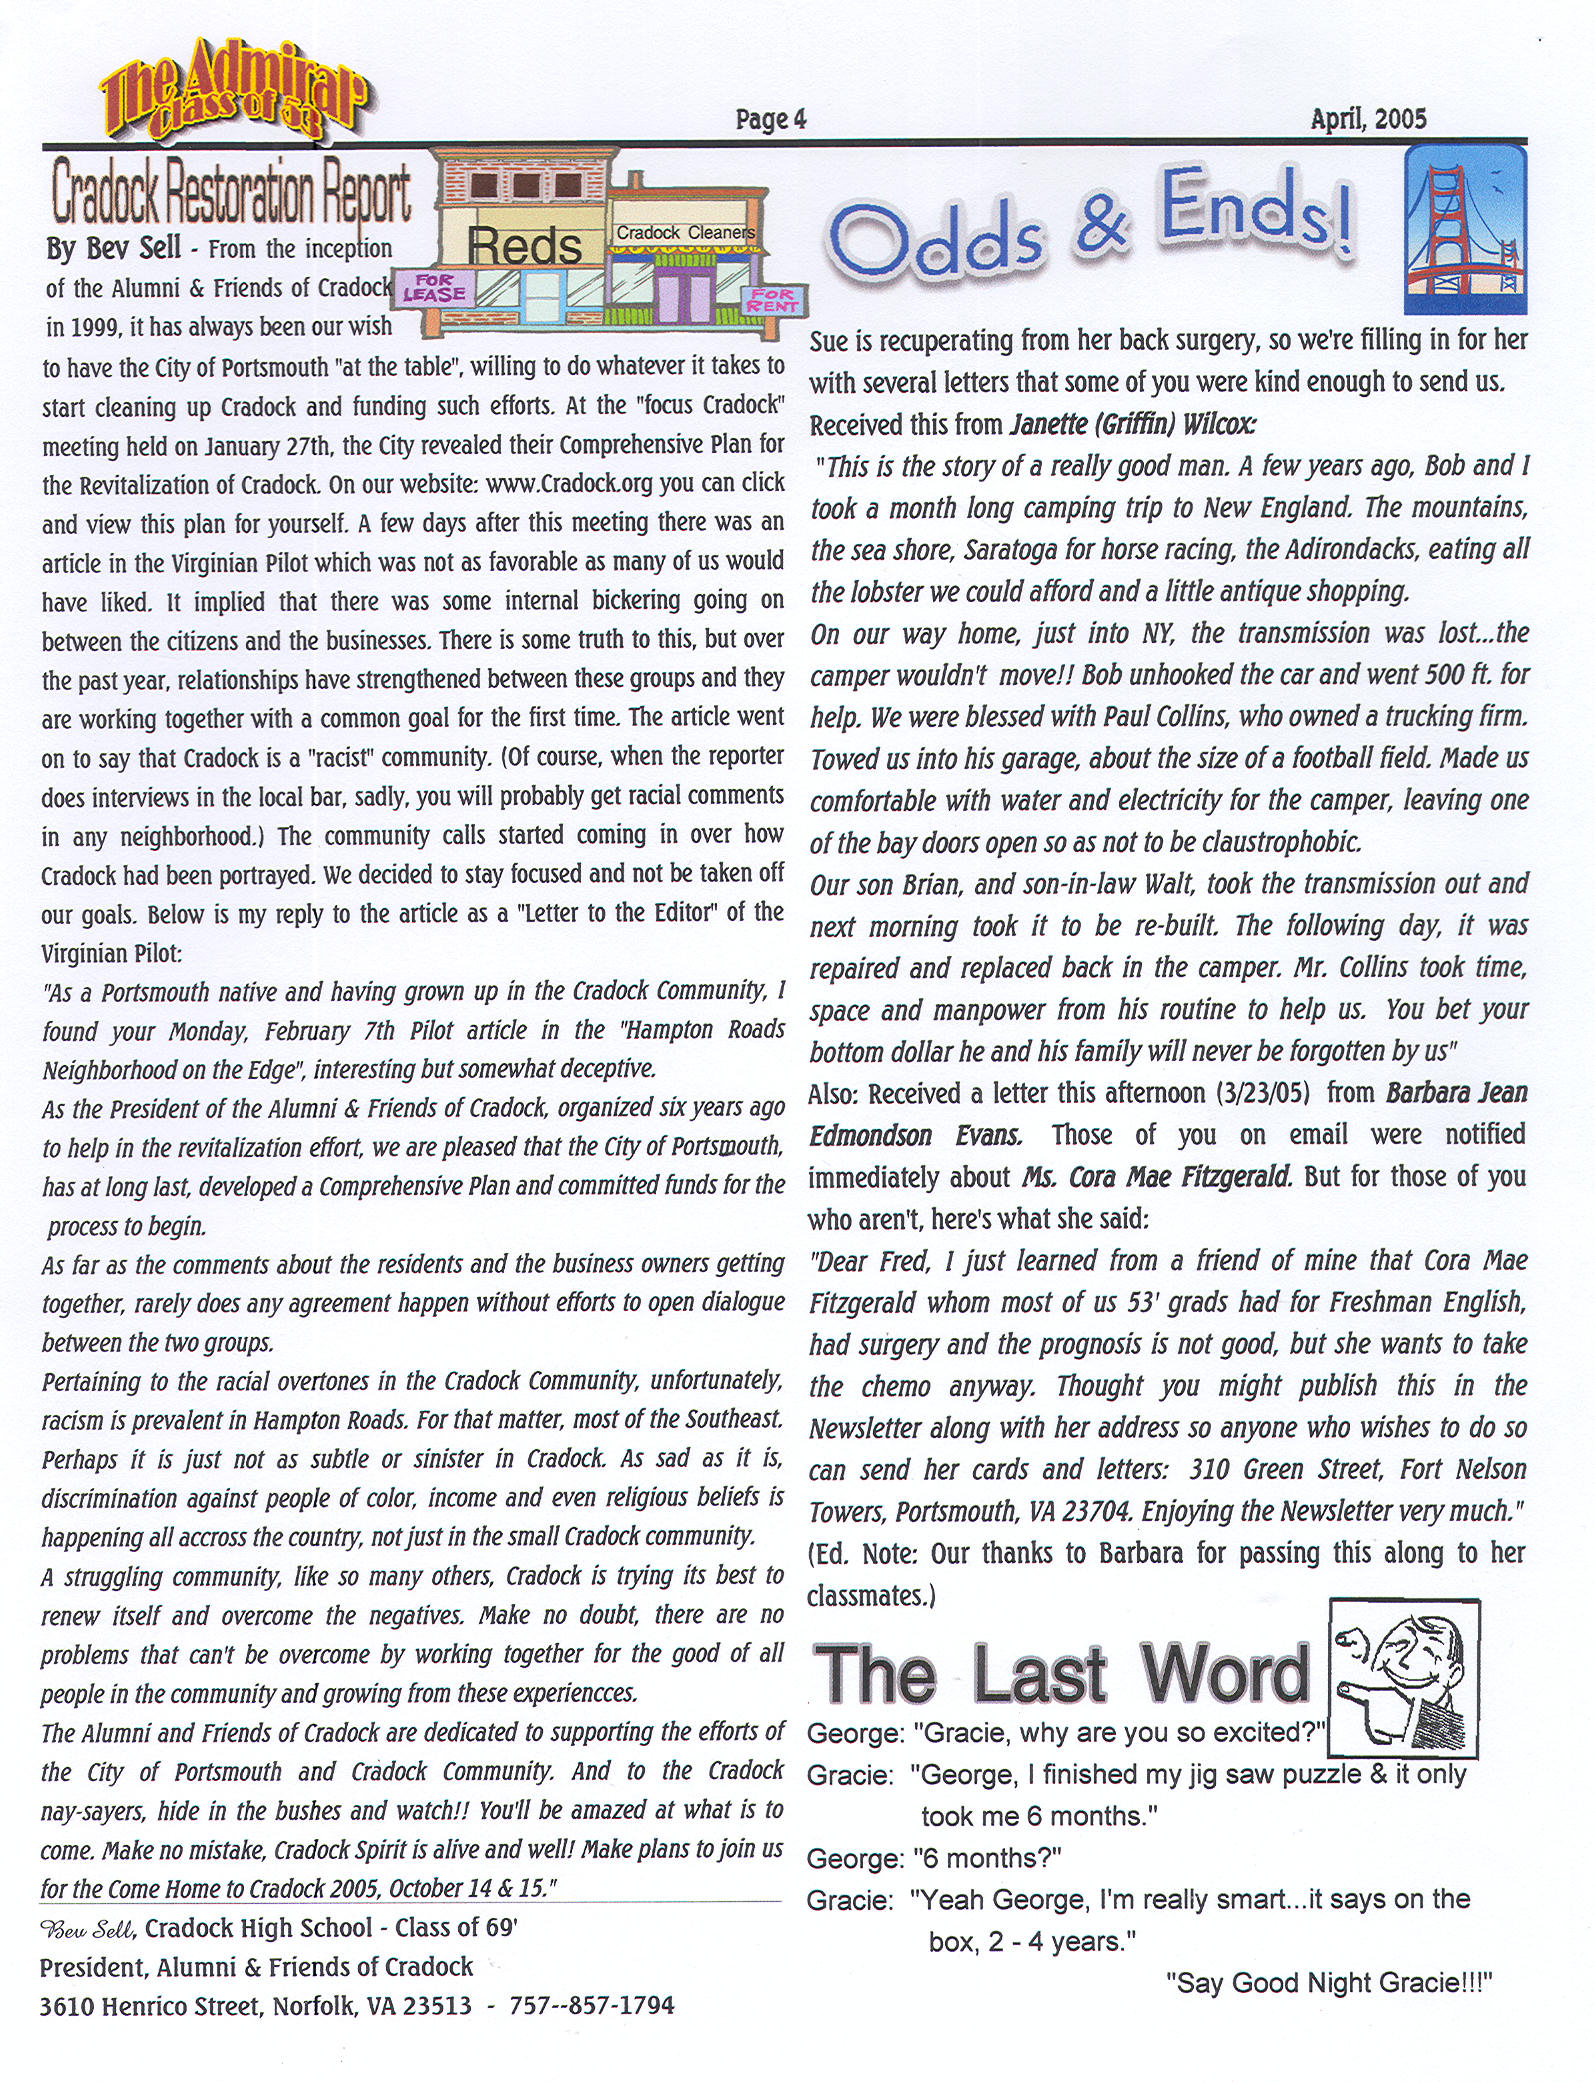 The Admiral - April 2005 - pg. 4